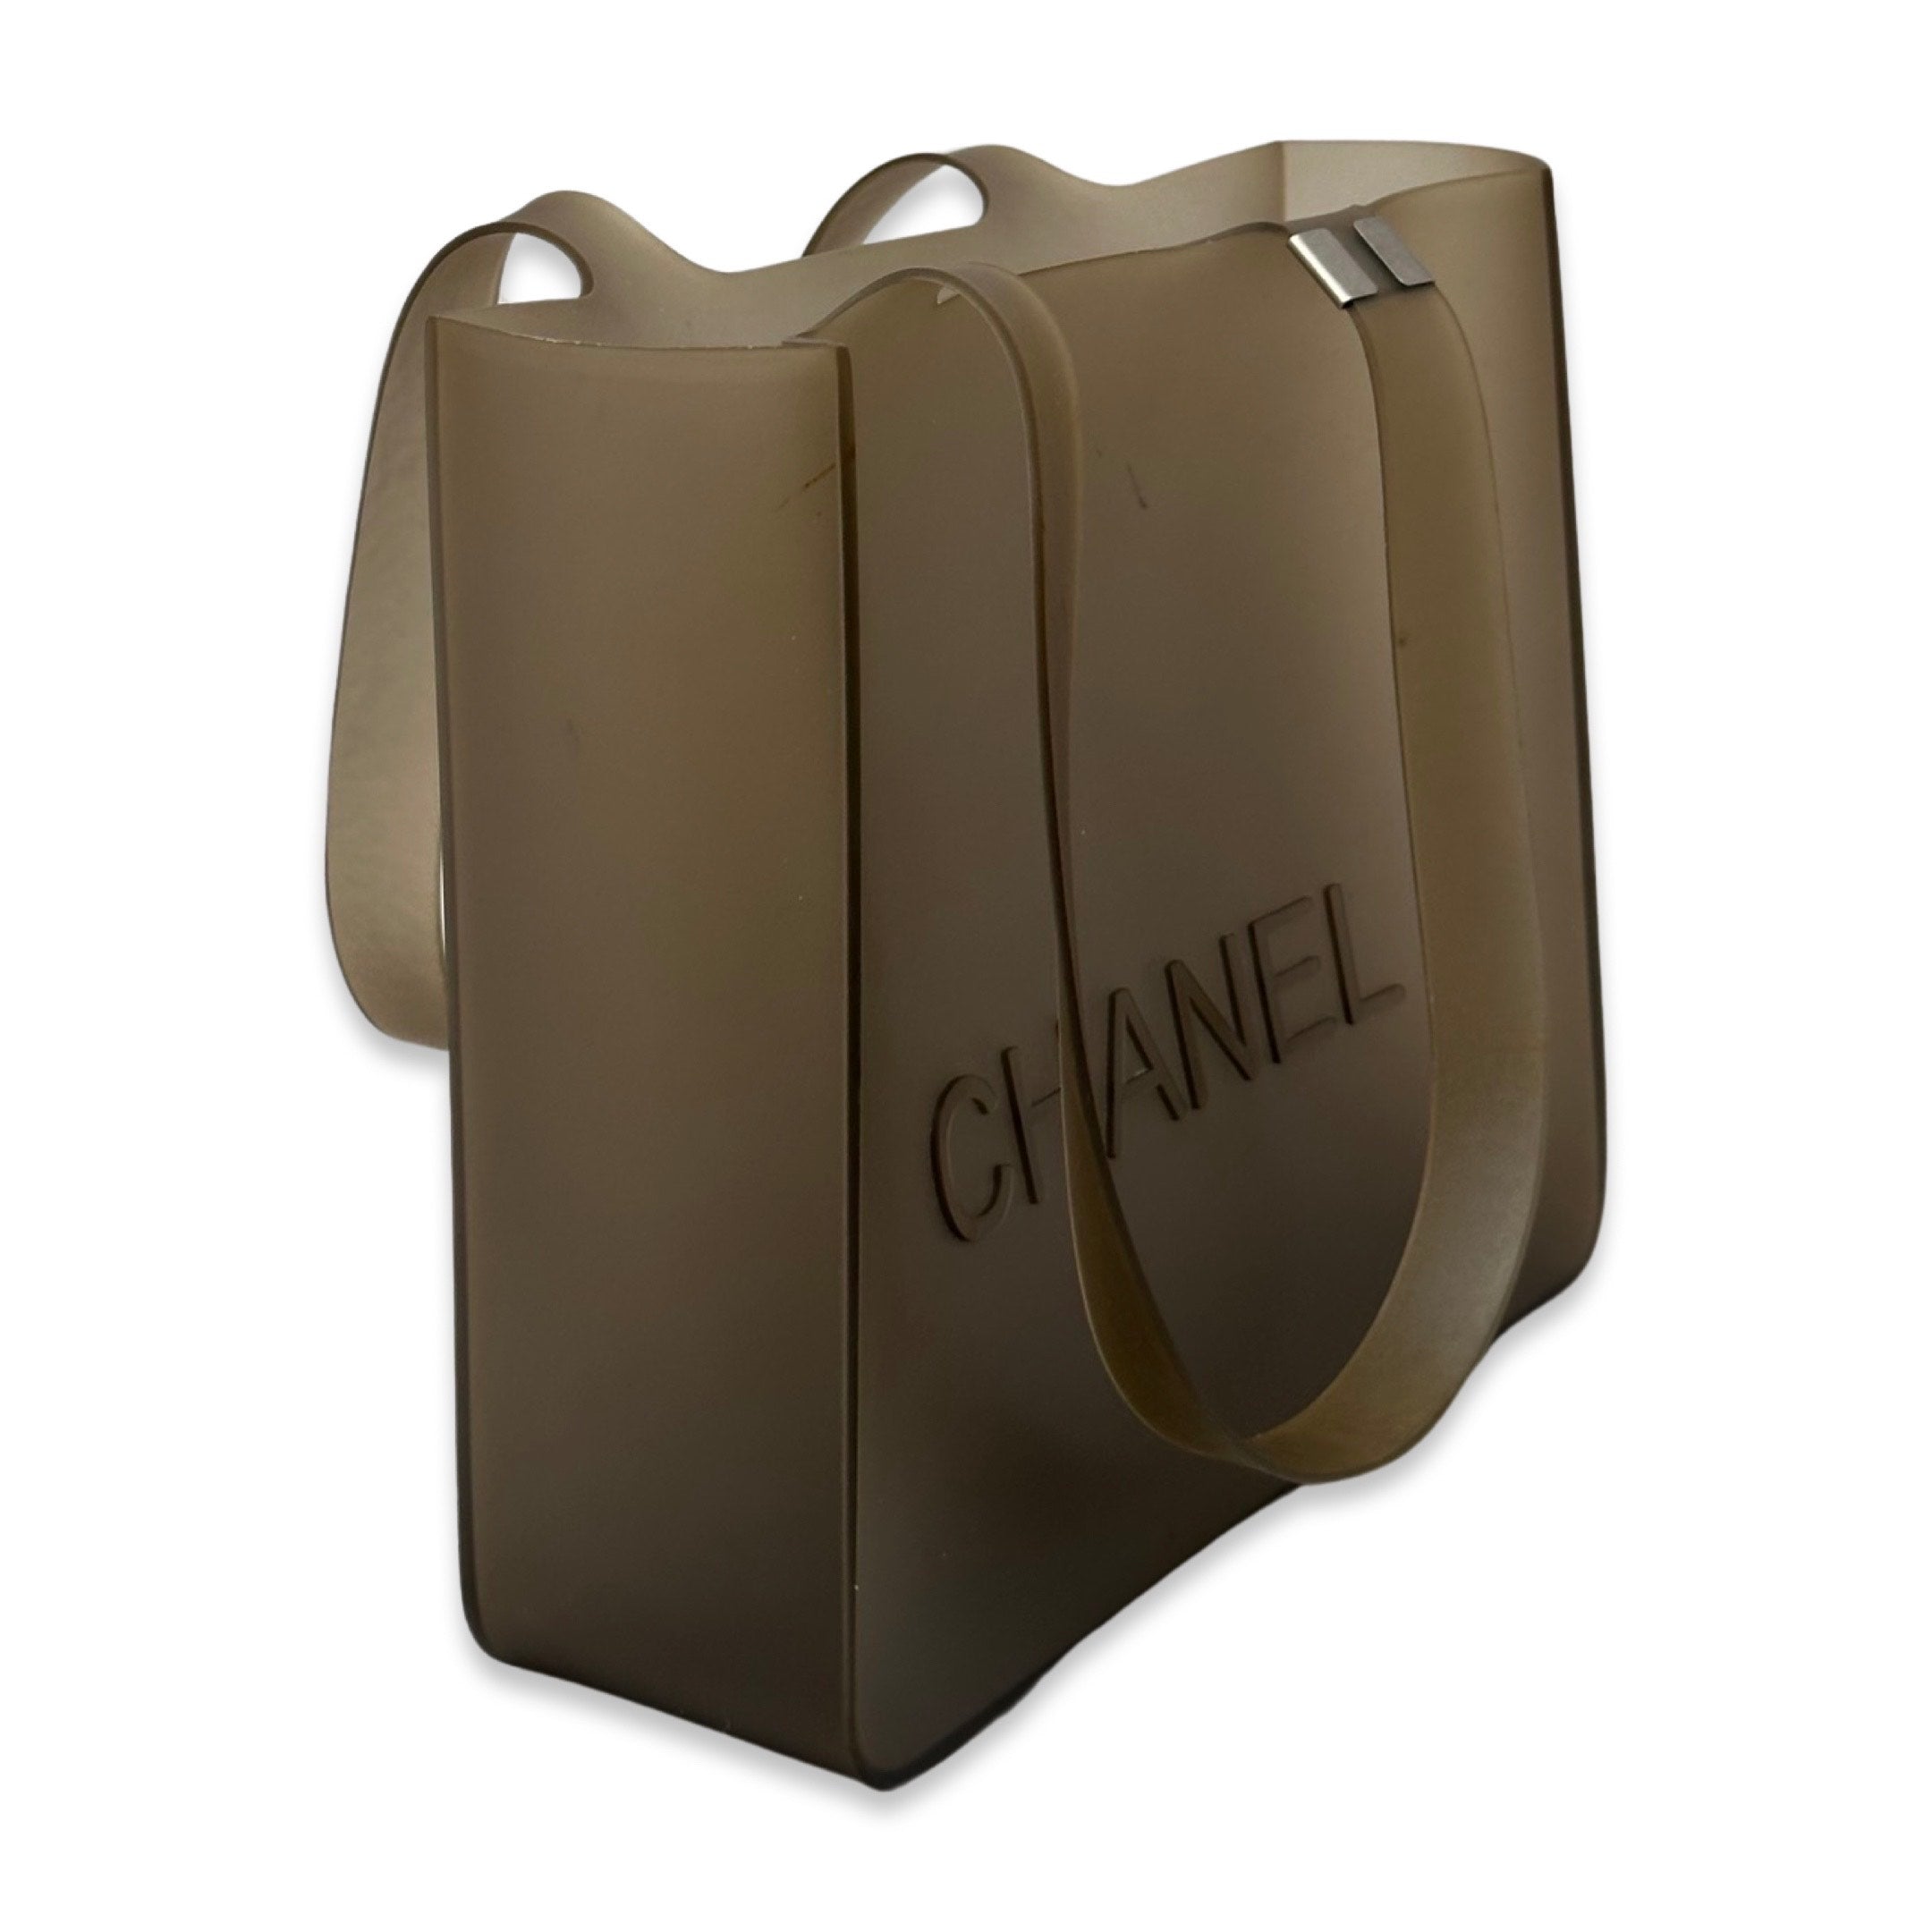 Chanel Chanel Light Gray Jelly Rubber Shoulder Tote Bag